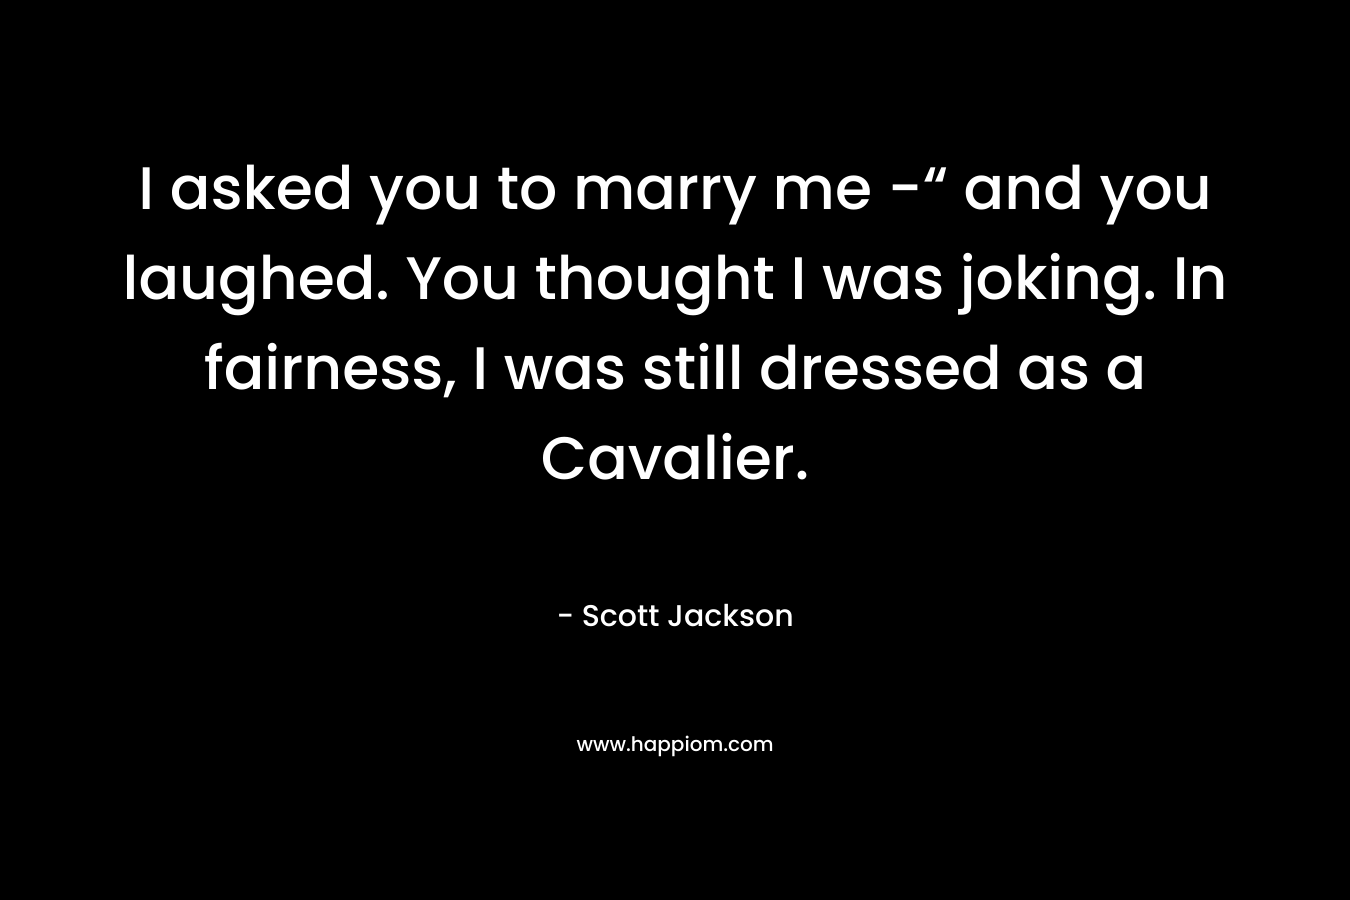 I asked you to marry me -“ and you laughed. You thought I was joking. In fairness, I was still dressed as a Cavalier. – Scott   Jackson